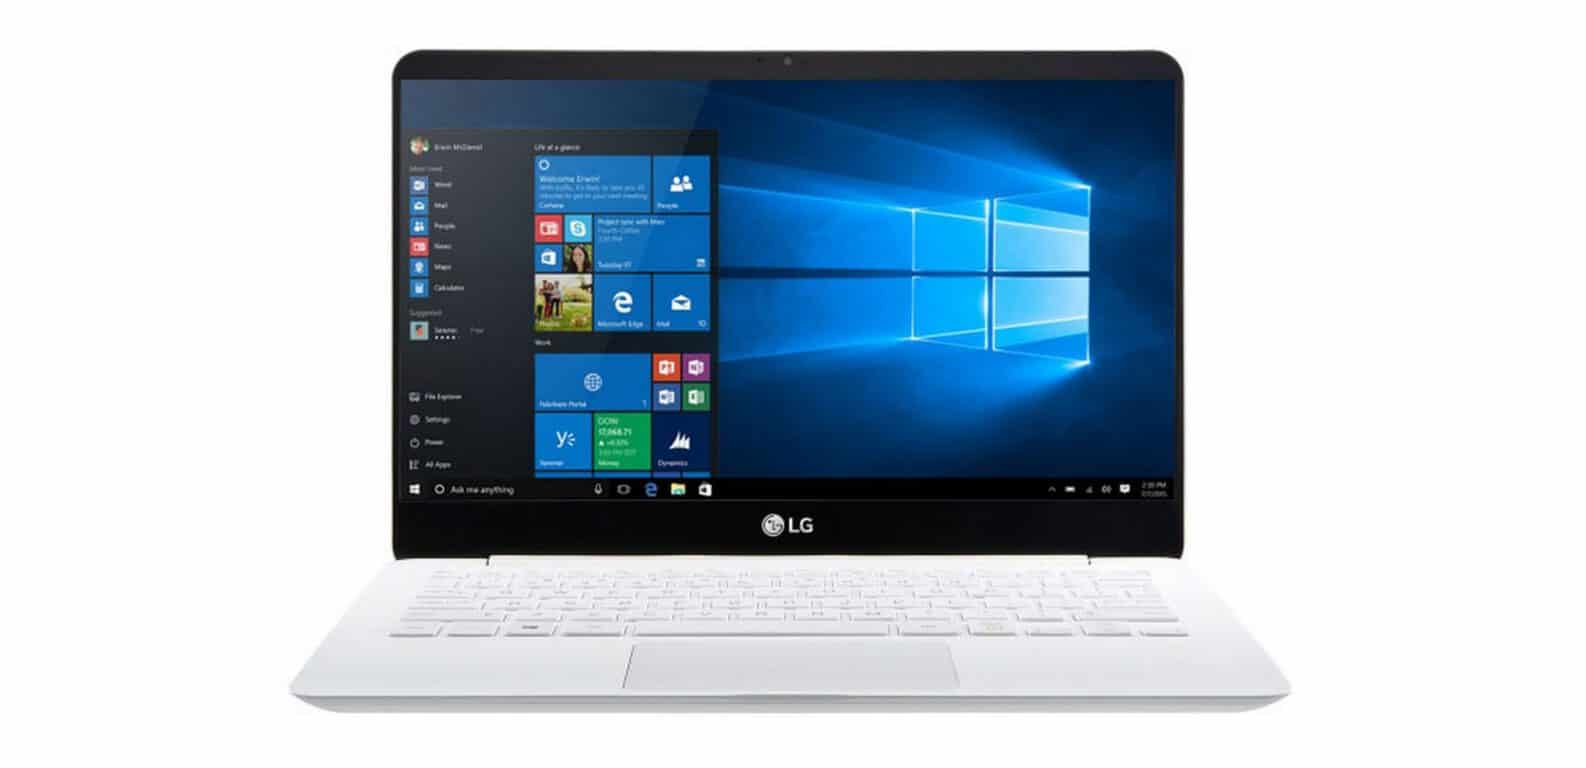 LG showcases a number of new Windows 10 devices in Korea - OnMSFT.com - October 14, 2015